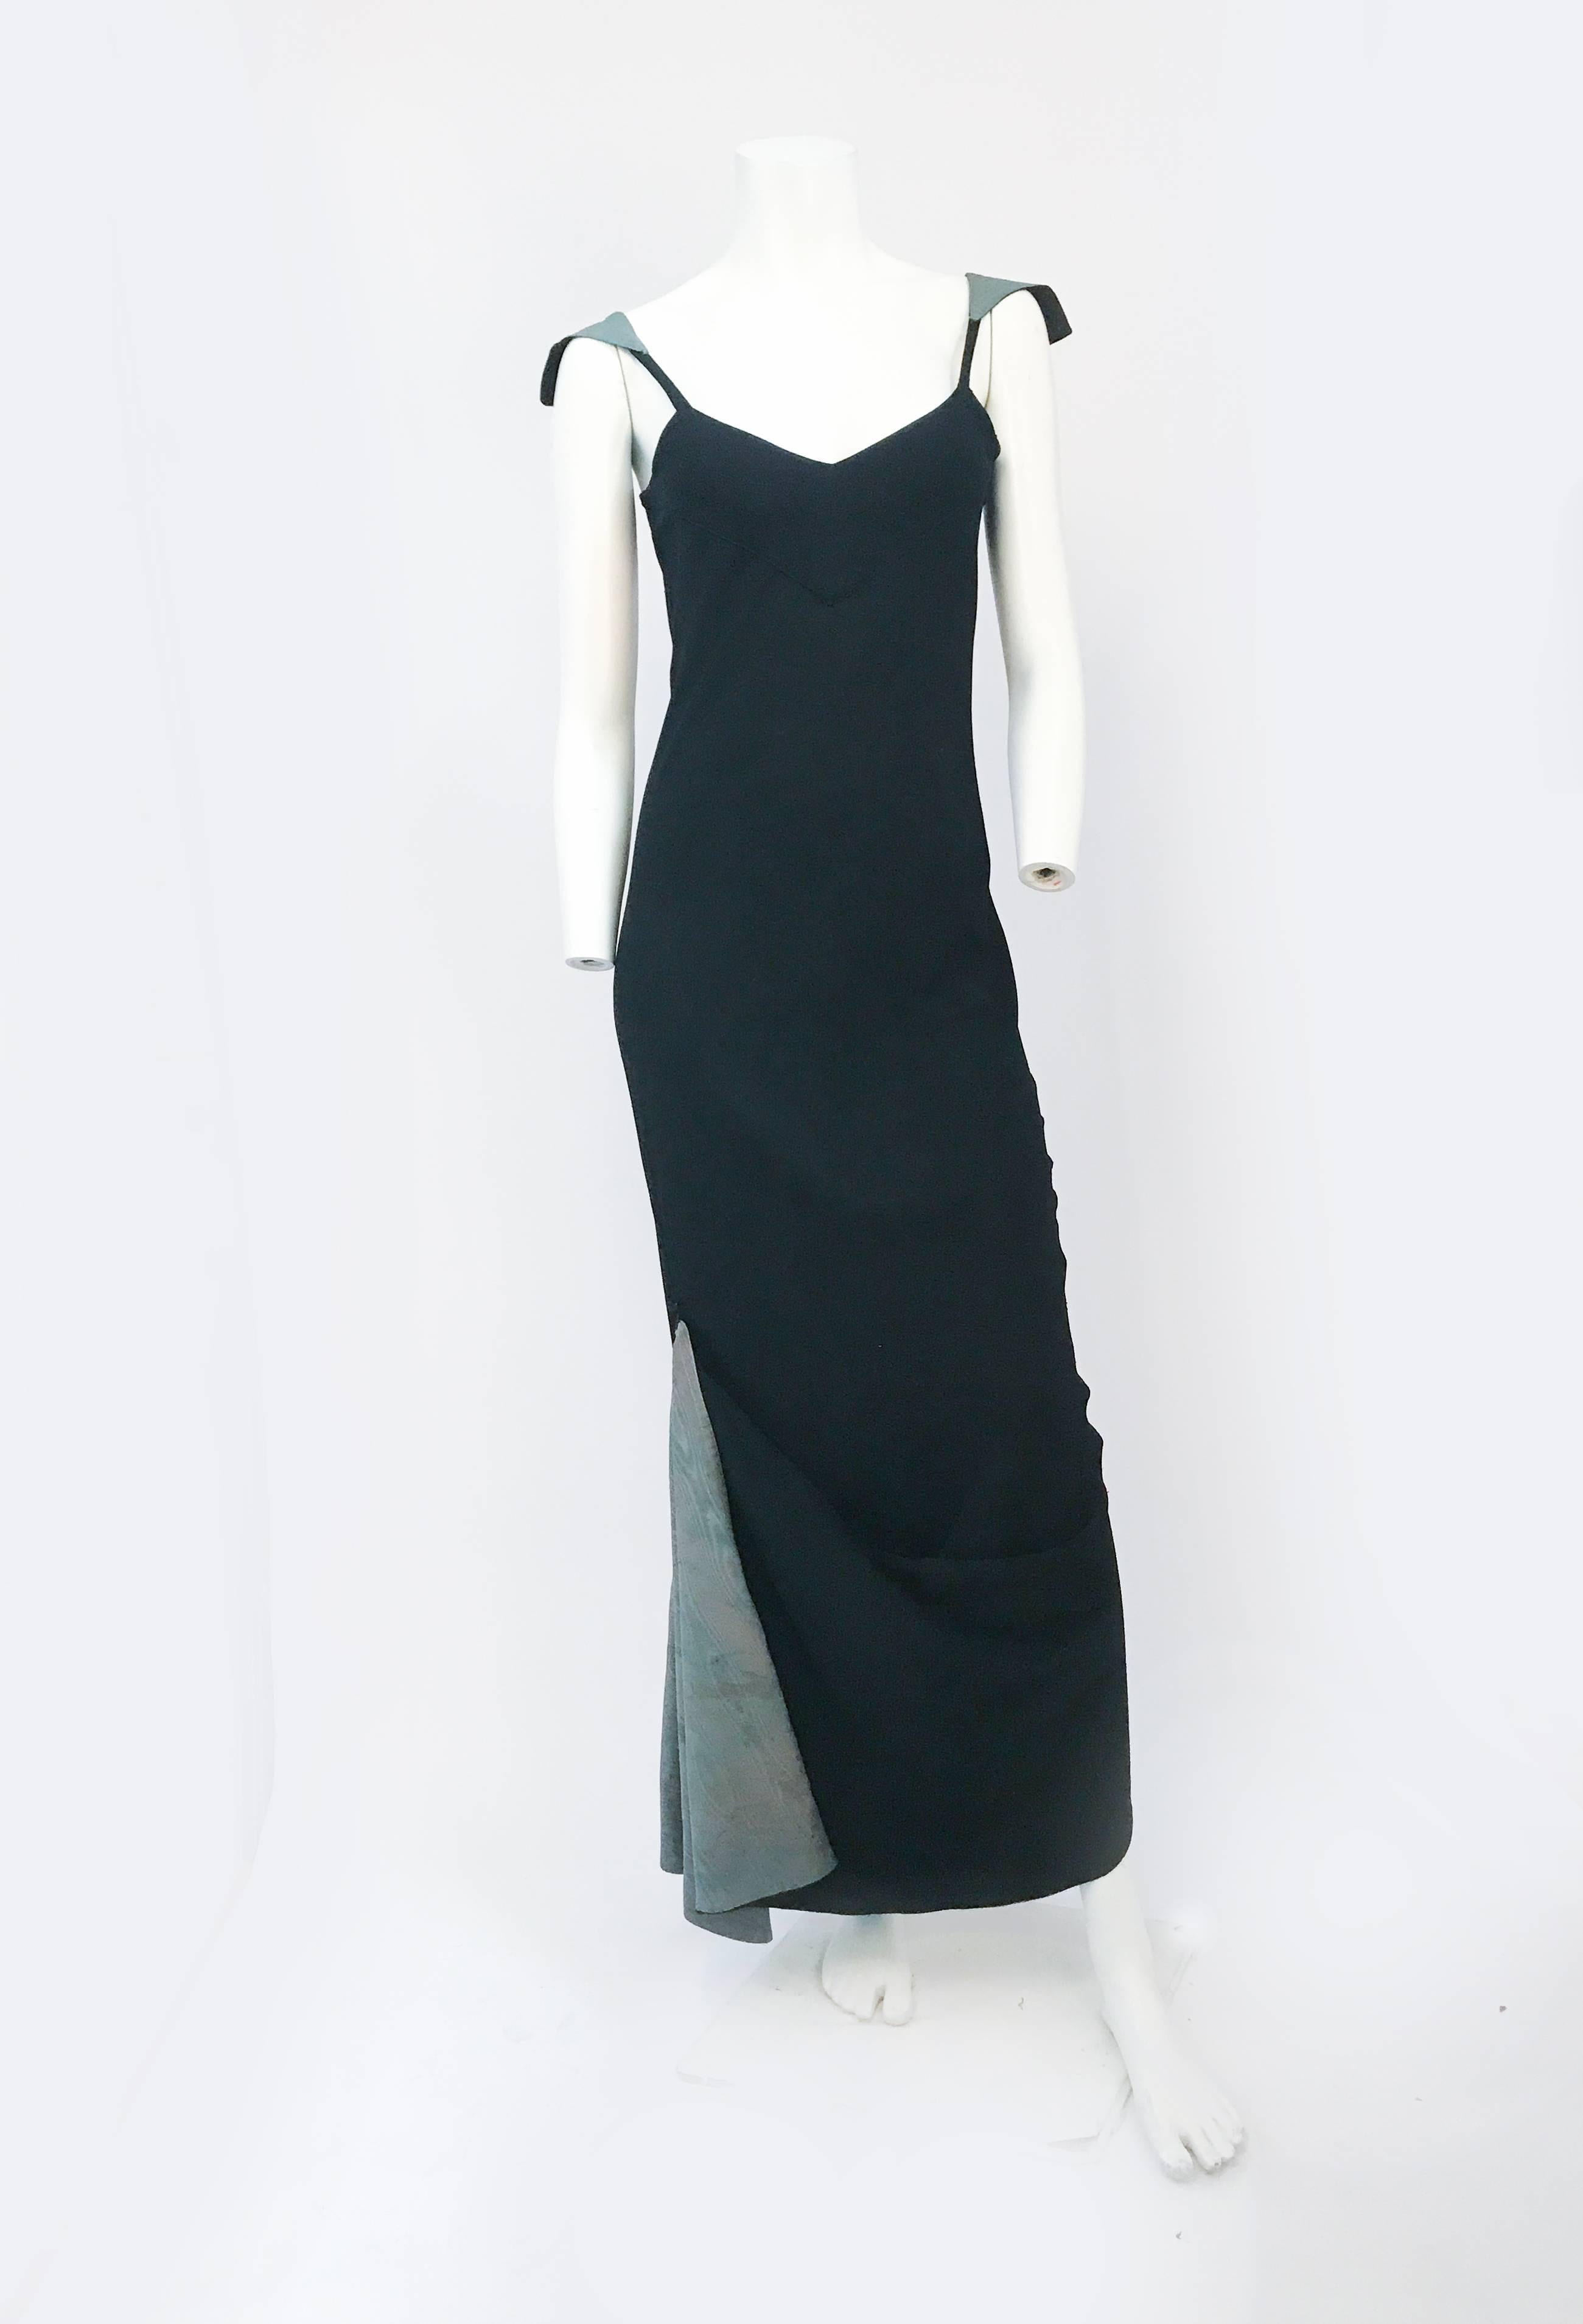 1930s Black Bias Cut Crepe Dress With Green moire Details. Black custom made bias cut crepe dress with mermaid fishtail train lined with green moire. Green Moire shoulder straps. Moire button and loop to secure train while dancing.